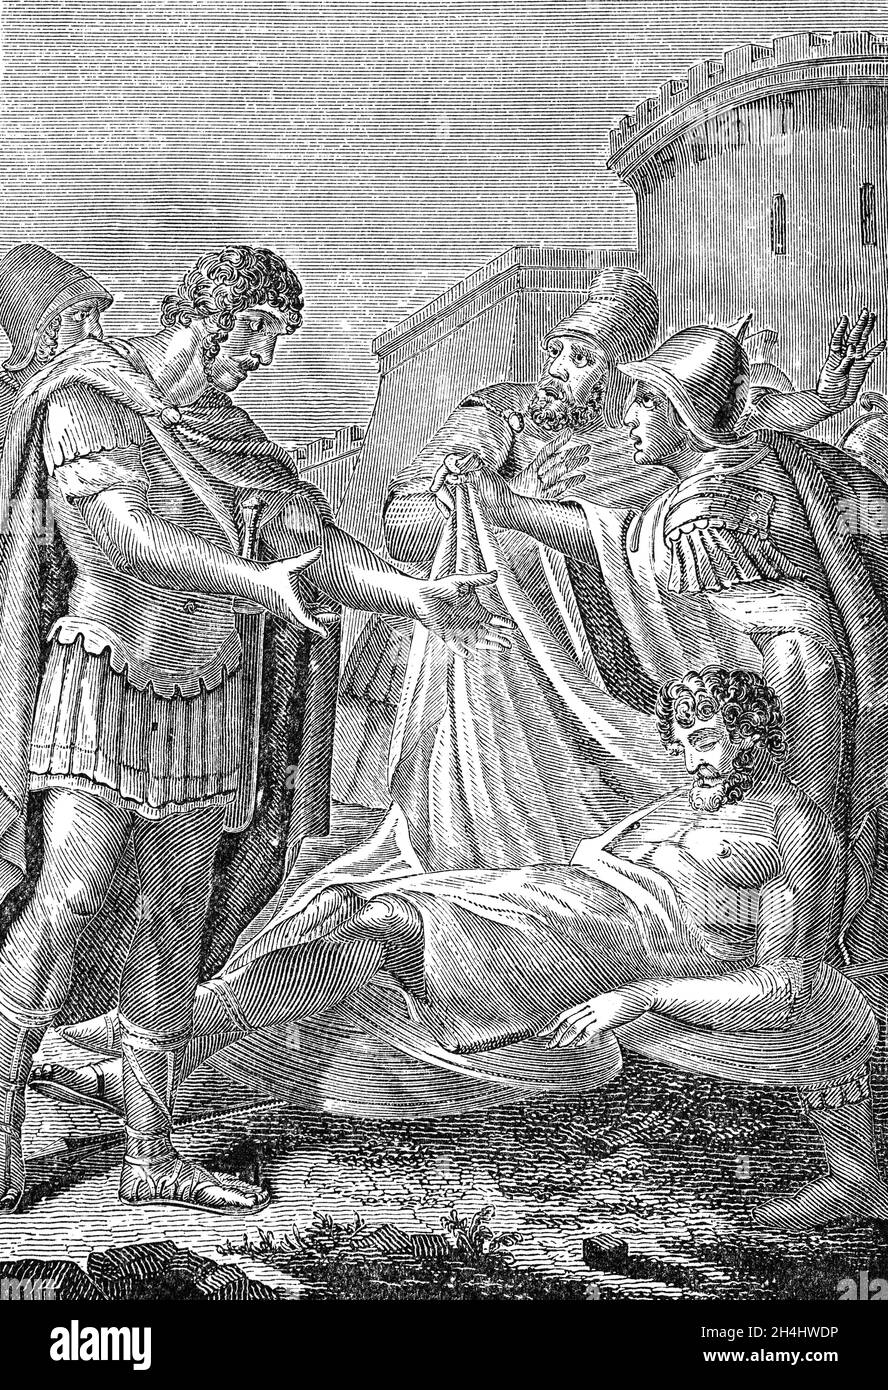 A late 19th Century illustration of Octavian aka Caesar Augustus (63BC- AD 14), viewing the body of Mark Antony. Octavian was the first Roman emperor, reigning from 27 BC until his death in AD 14. Founder of the Roman Principate (the first phase of the Roman Empire) he was one of the most effective leaders in human history. During the on-going conflict with Antony and Cleopatra, Octavian pursued and defeated their forces in Alexandria in 30 BC, following which Antony committed suicide, by falling on his own sword. Stock Photo